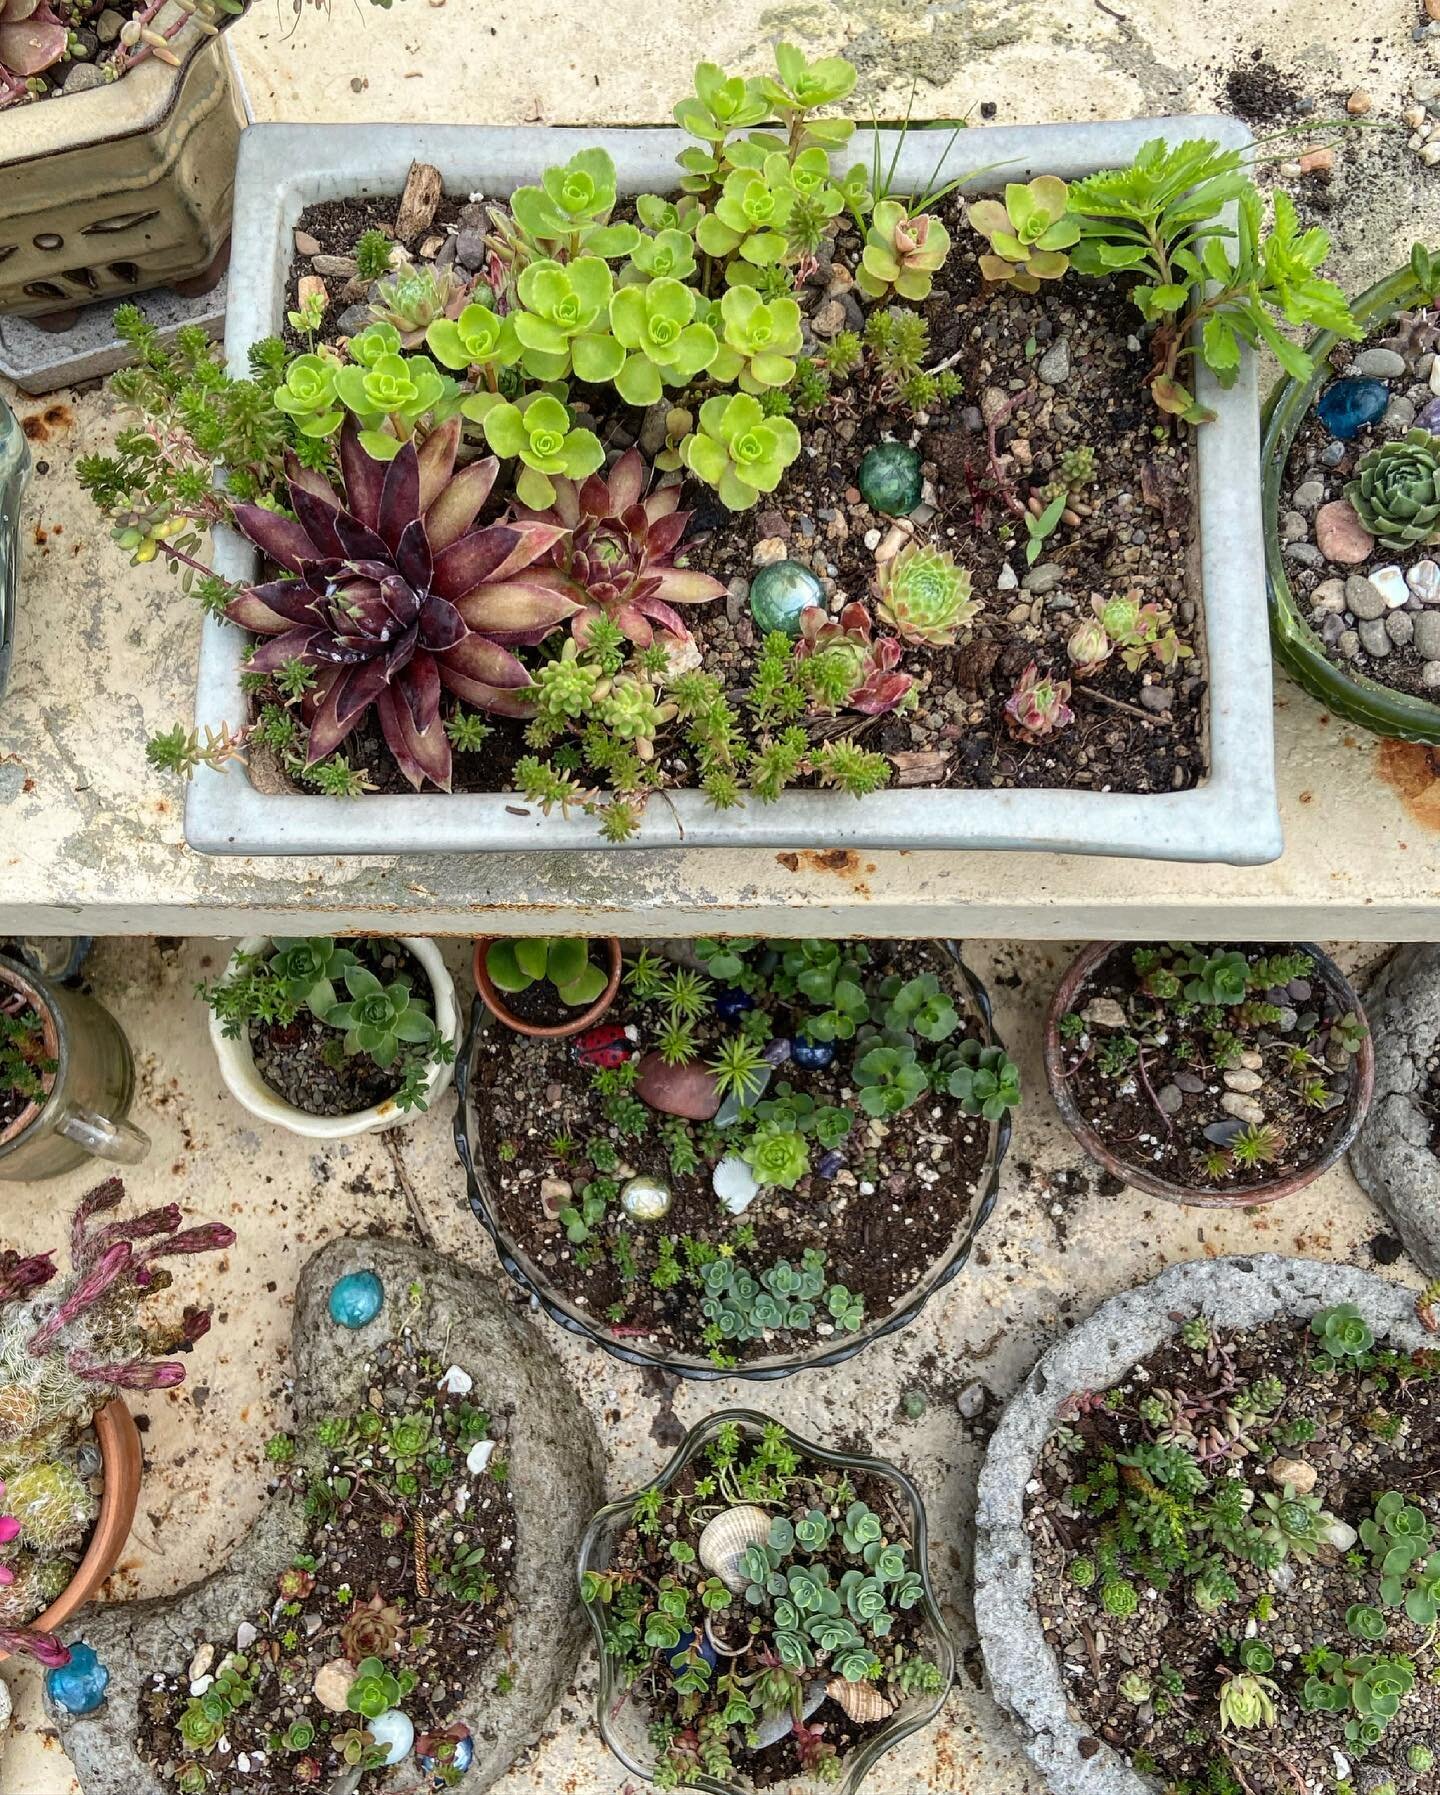 Hens and chicks in hypertufa planters - a porous, homemade planter molded from a mix of peat moss, cement, and sand. We love offering this as a workshop and hope to plan one soon!

#farmerflorist #grownnotflown #hypertufa #statecollegepa #statecolleg